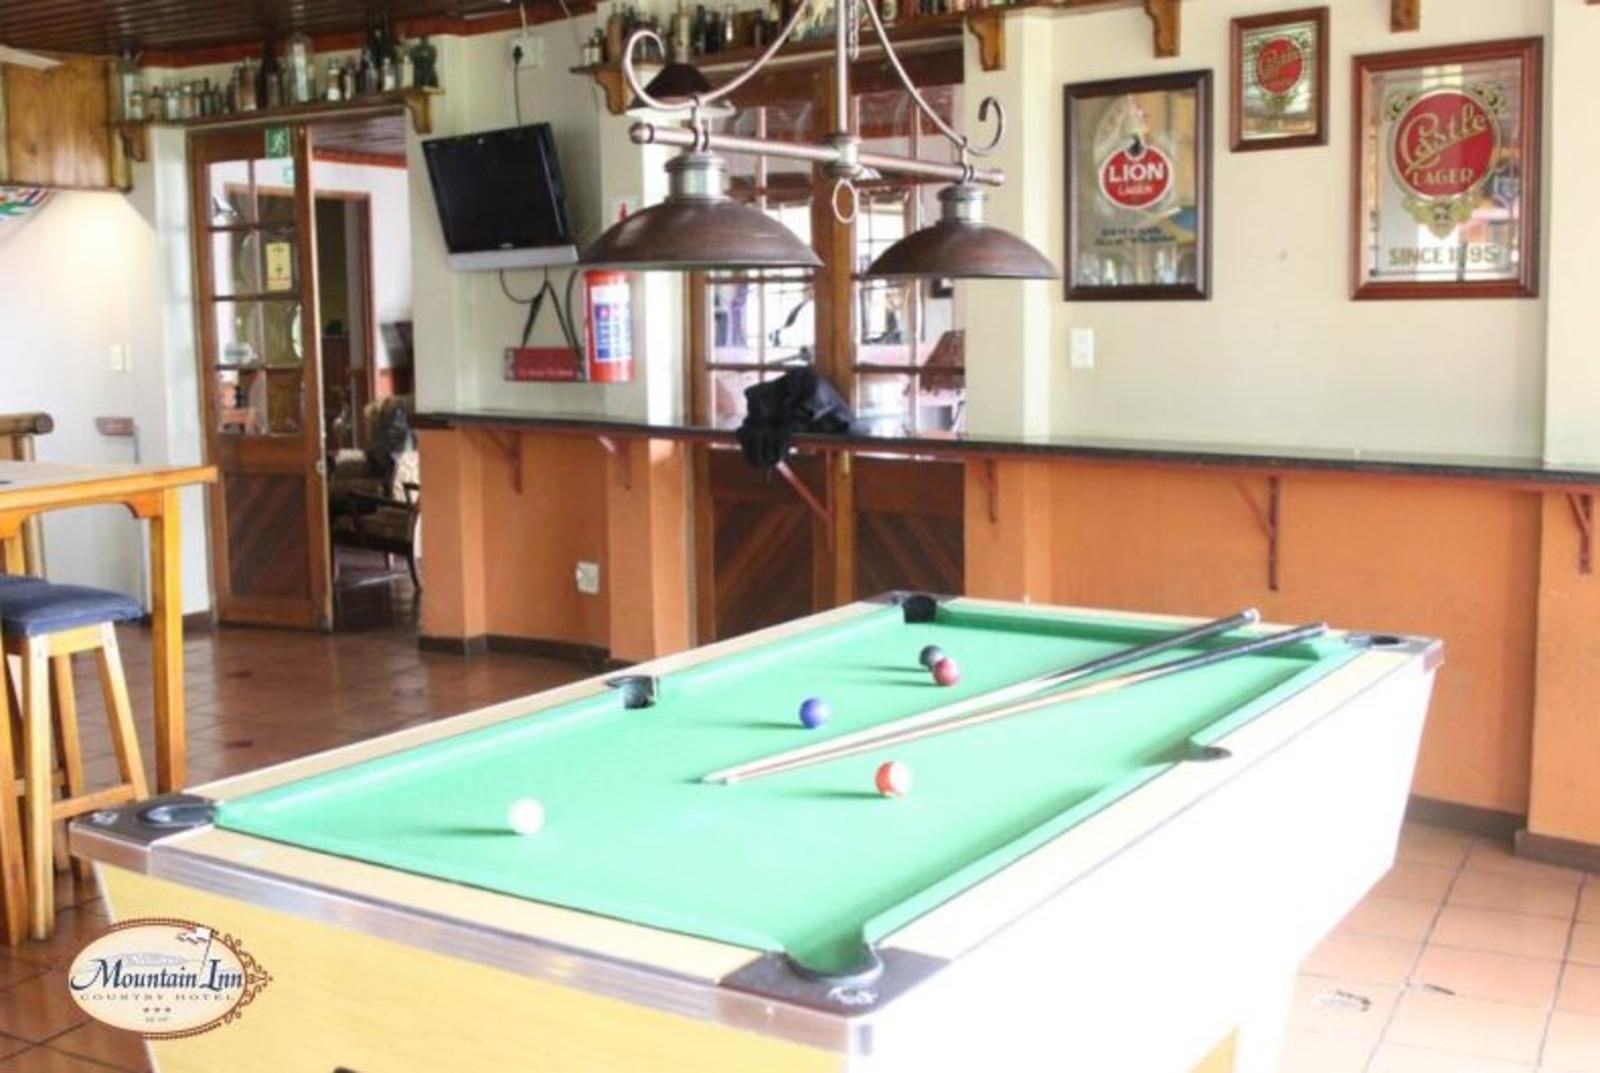 Mountain Inn Country Hotel Makhado Louis Trichardt Limpopo Province South Africa Ball, Sport, Ball Game, Billiards